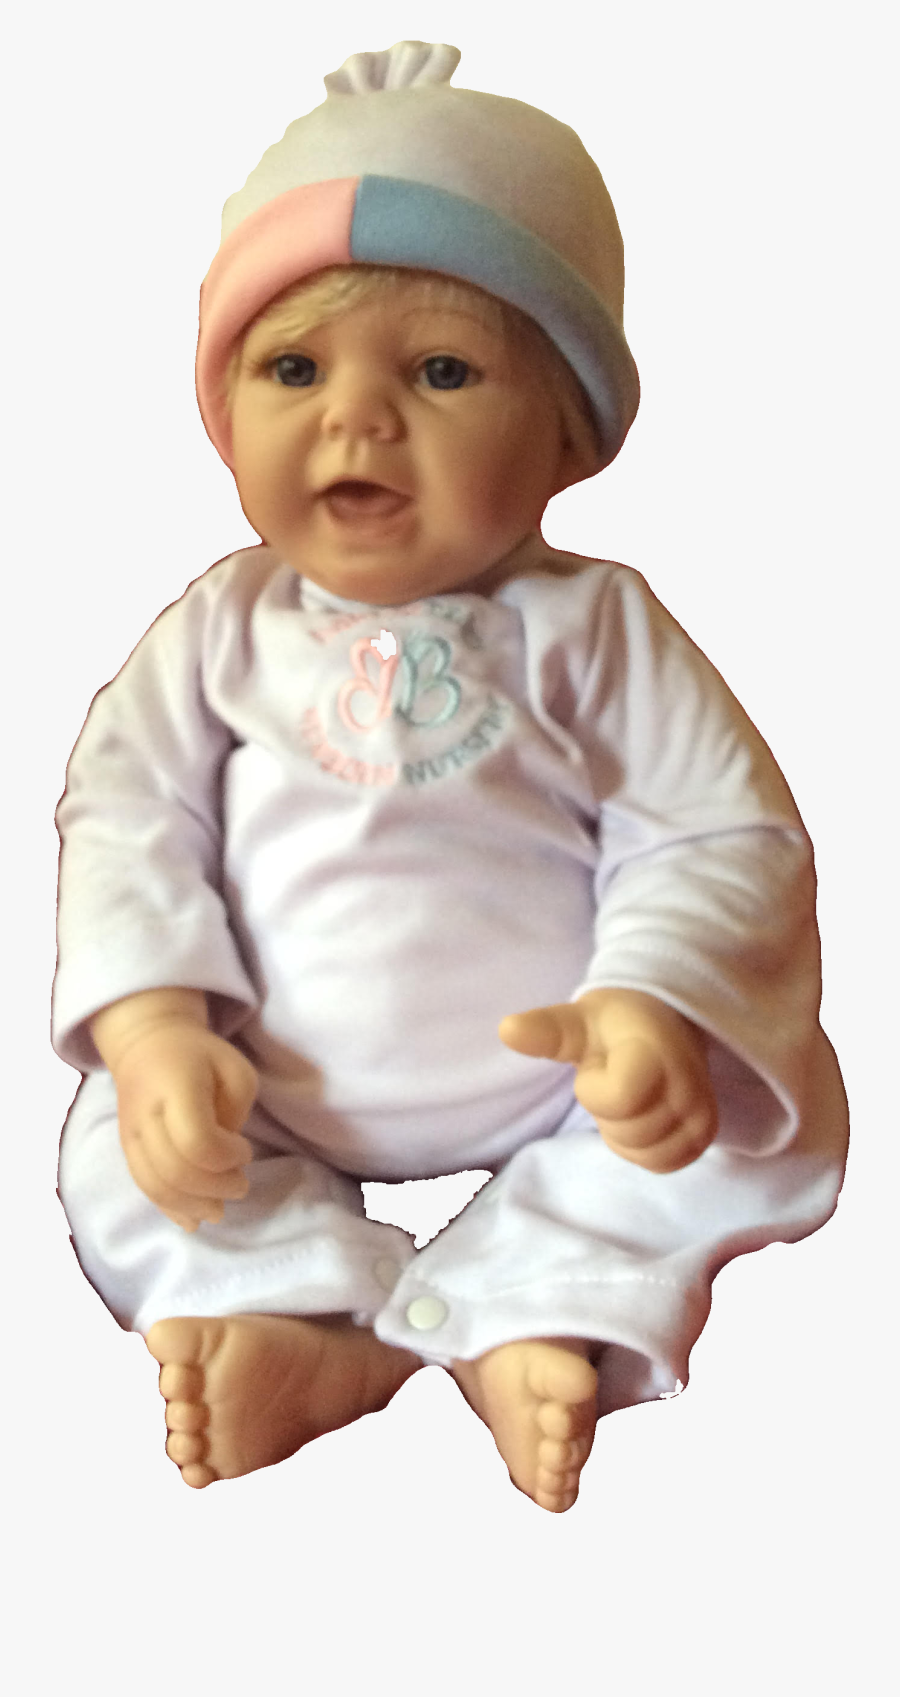 Transparent Baby Doll Png - Baby, Transparent Clipart